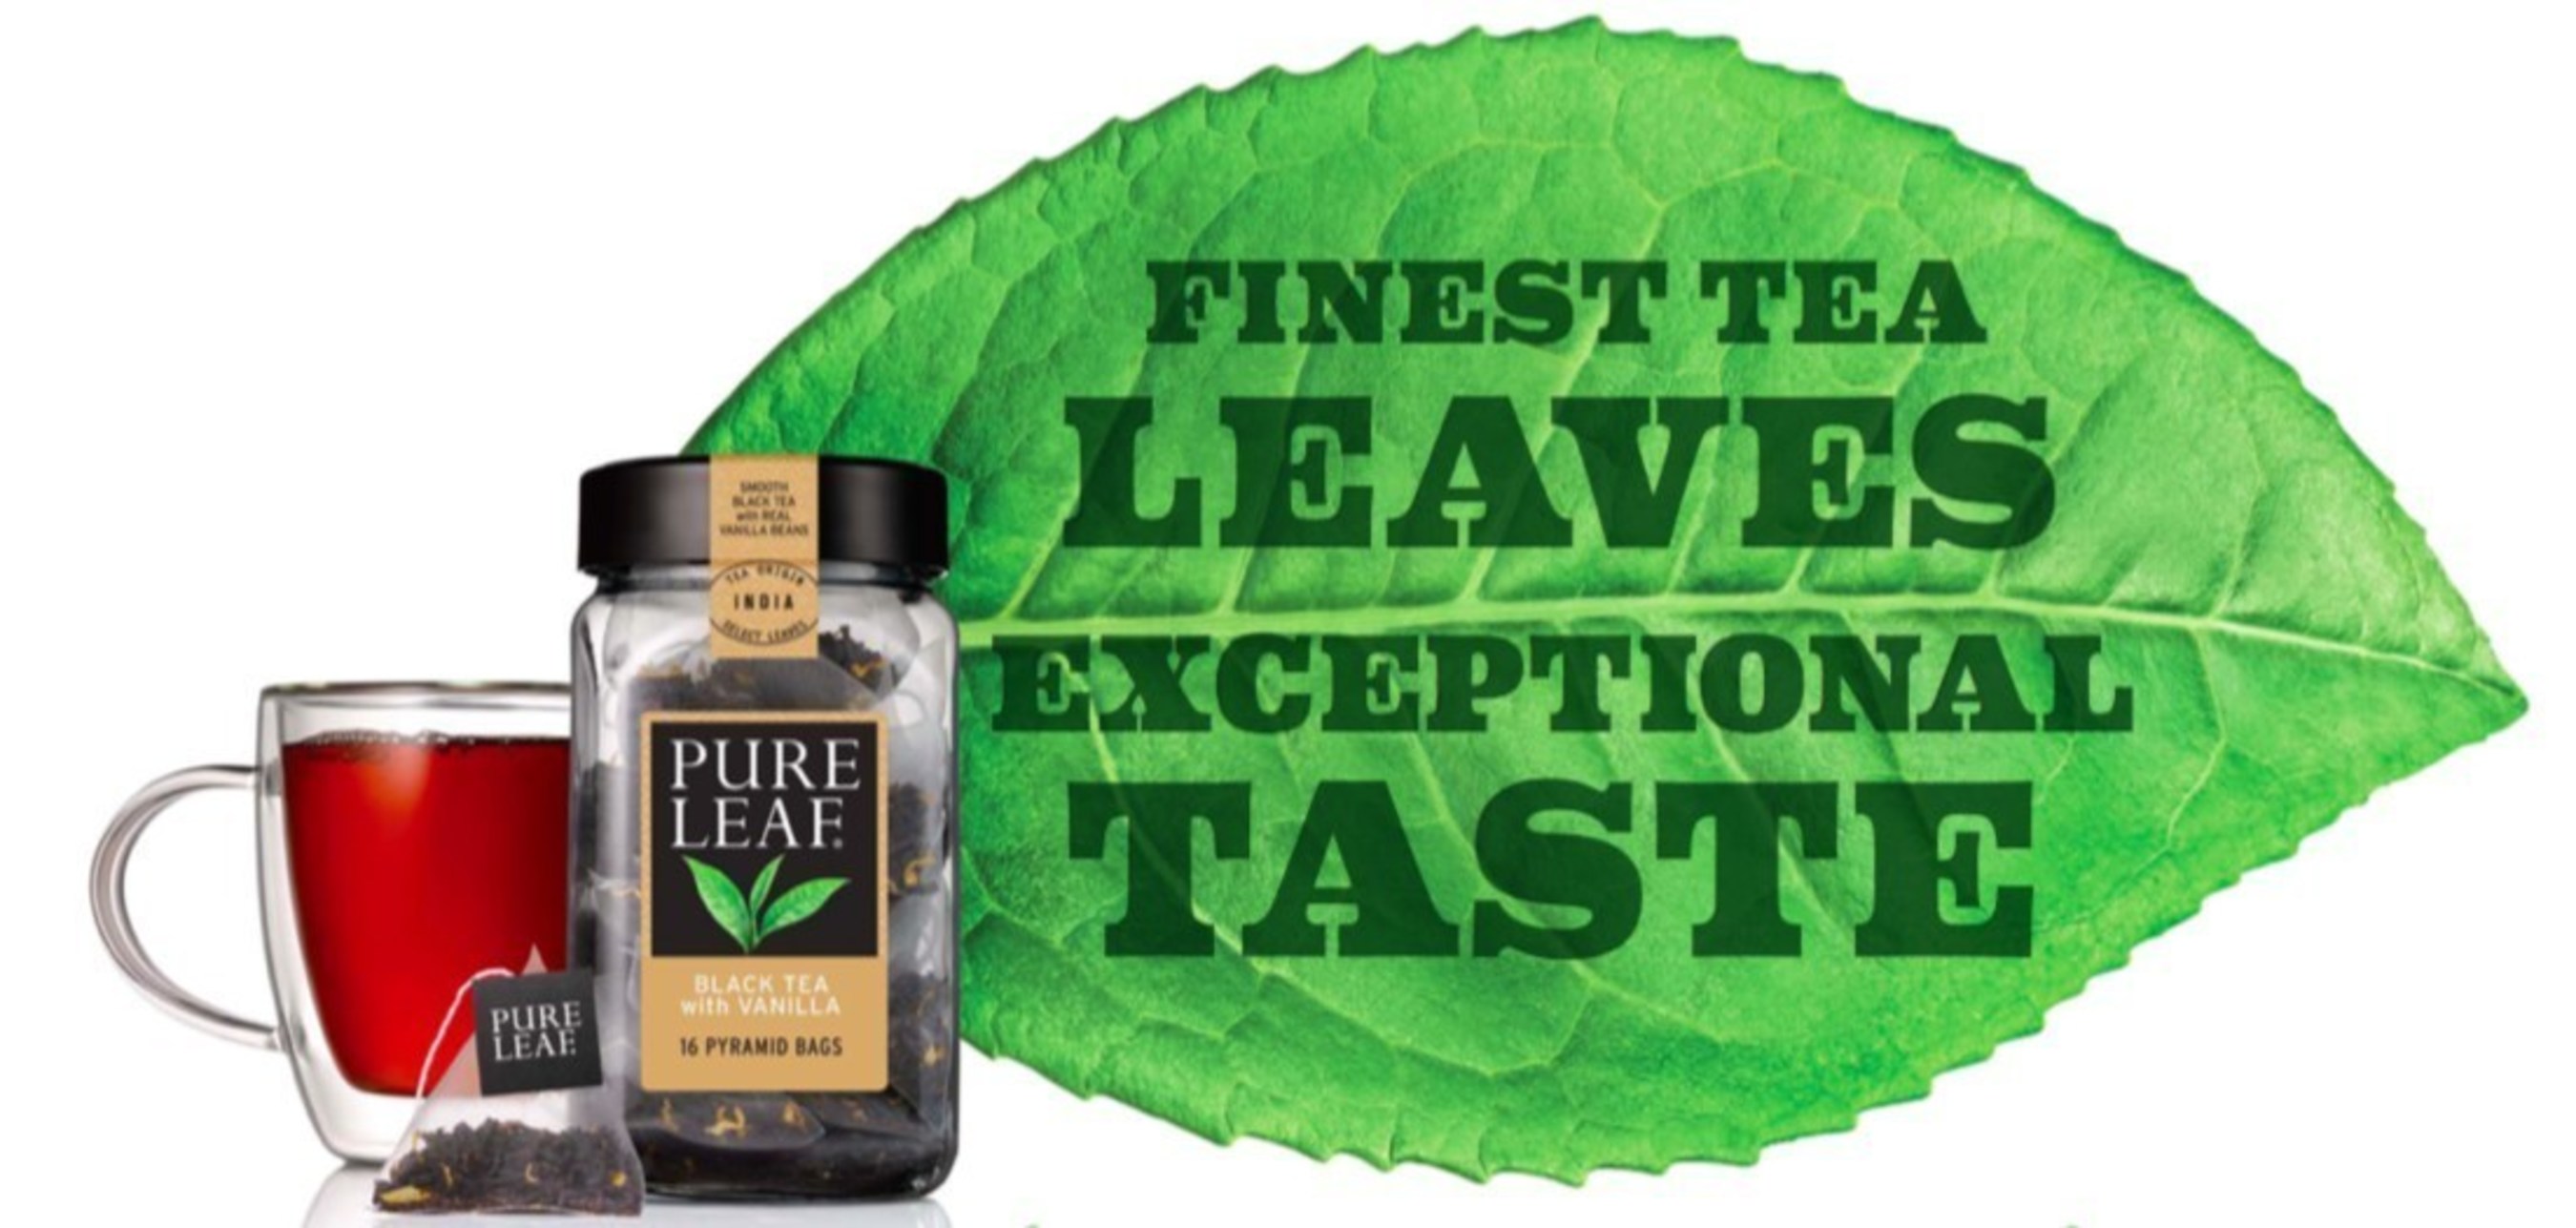 Pure Leaf Celebrates Its Love of Tea with New Bagged and Loose Leaf Varieties